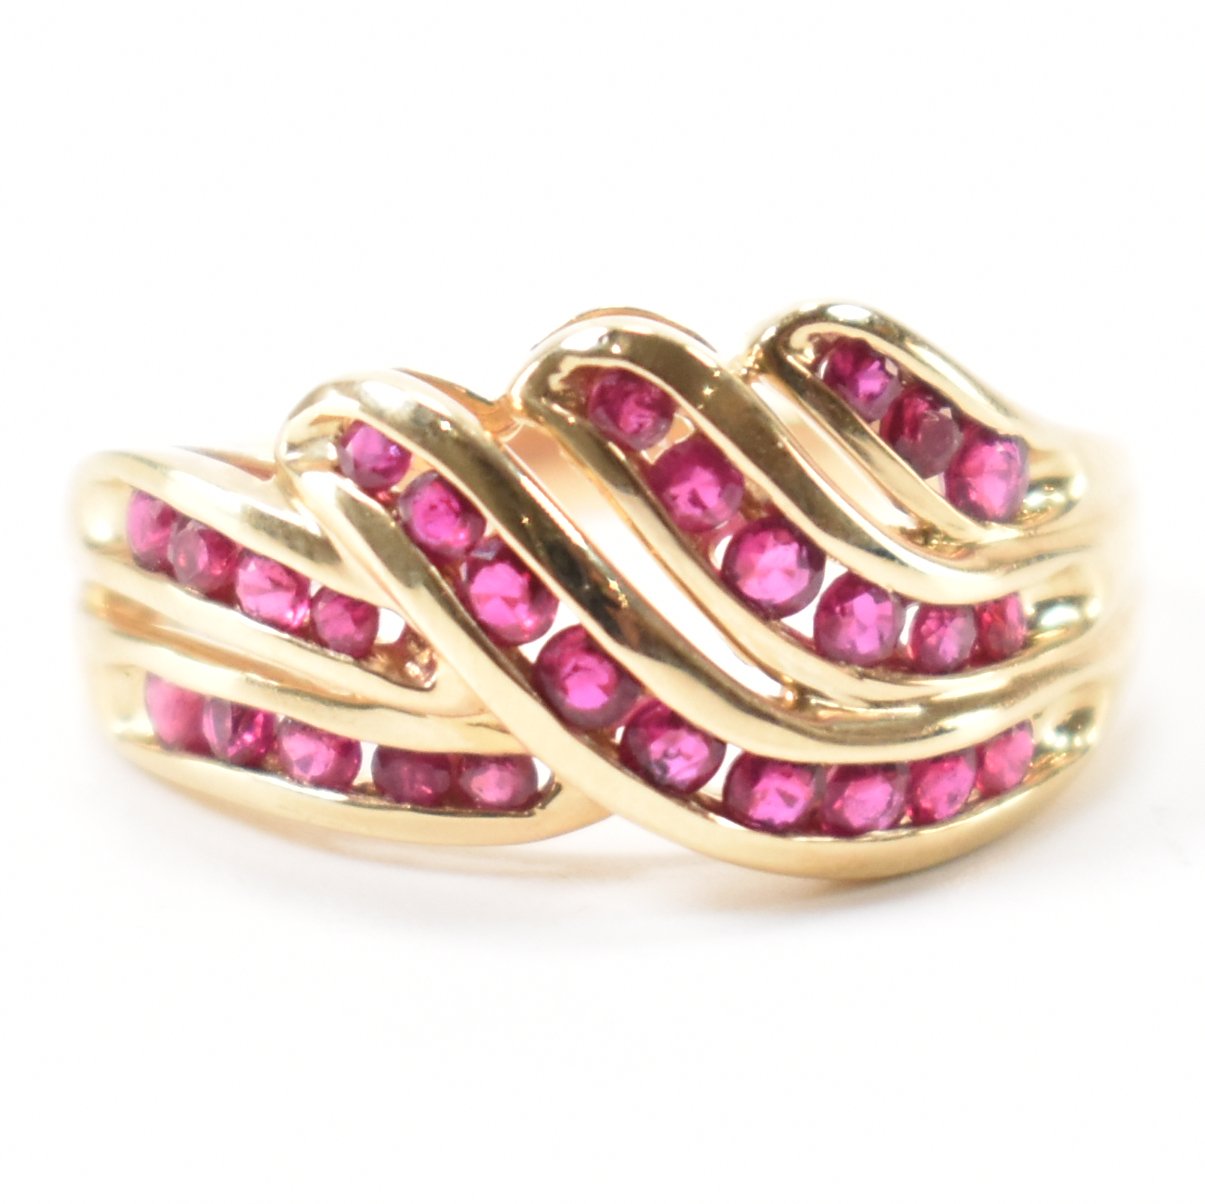 HALLMARKED 9CT GOLD & RUBY CROSSOVER RING